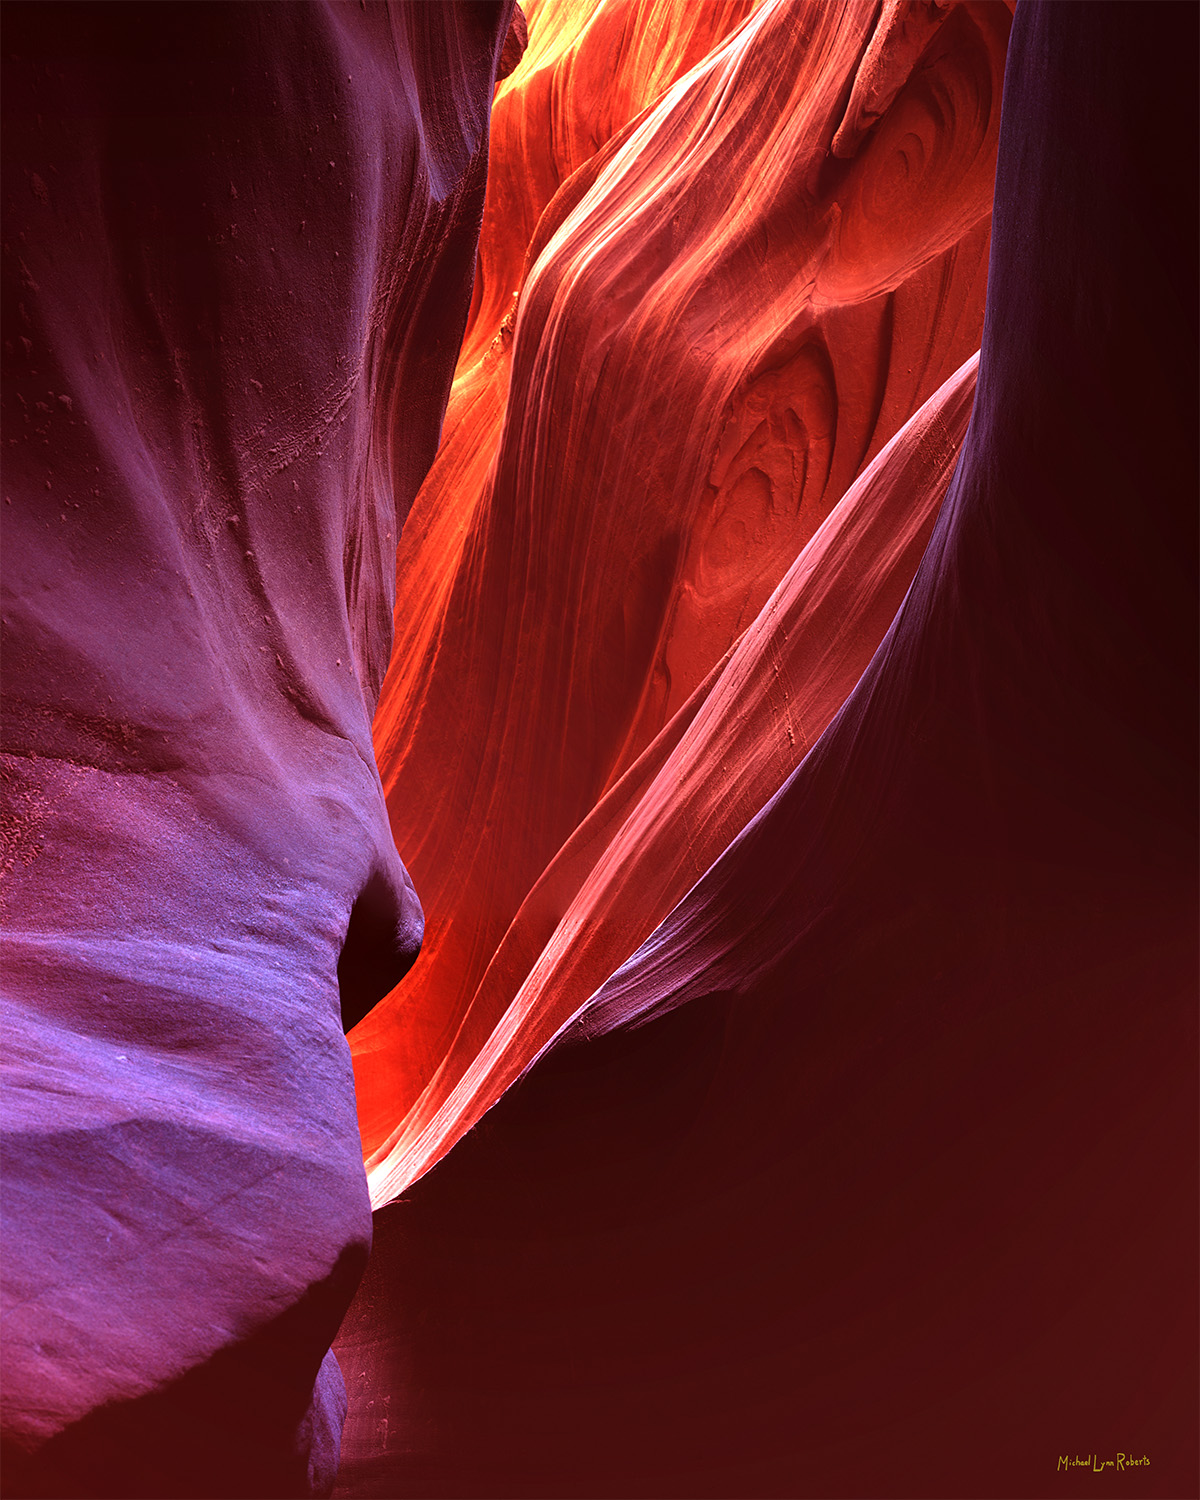 For eight years, at least once a year, I wandered through Lower Antelope Canyon, a Navajo Tribal Park, with my 4x5 and 8x10 cameras...